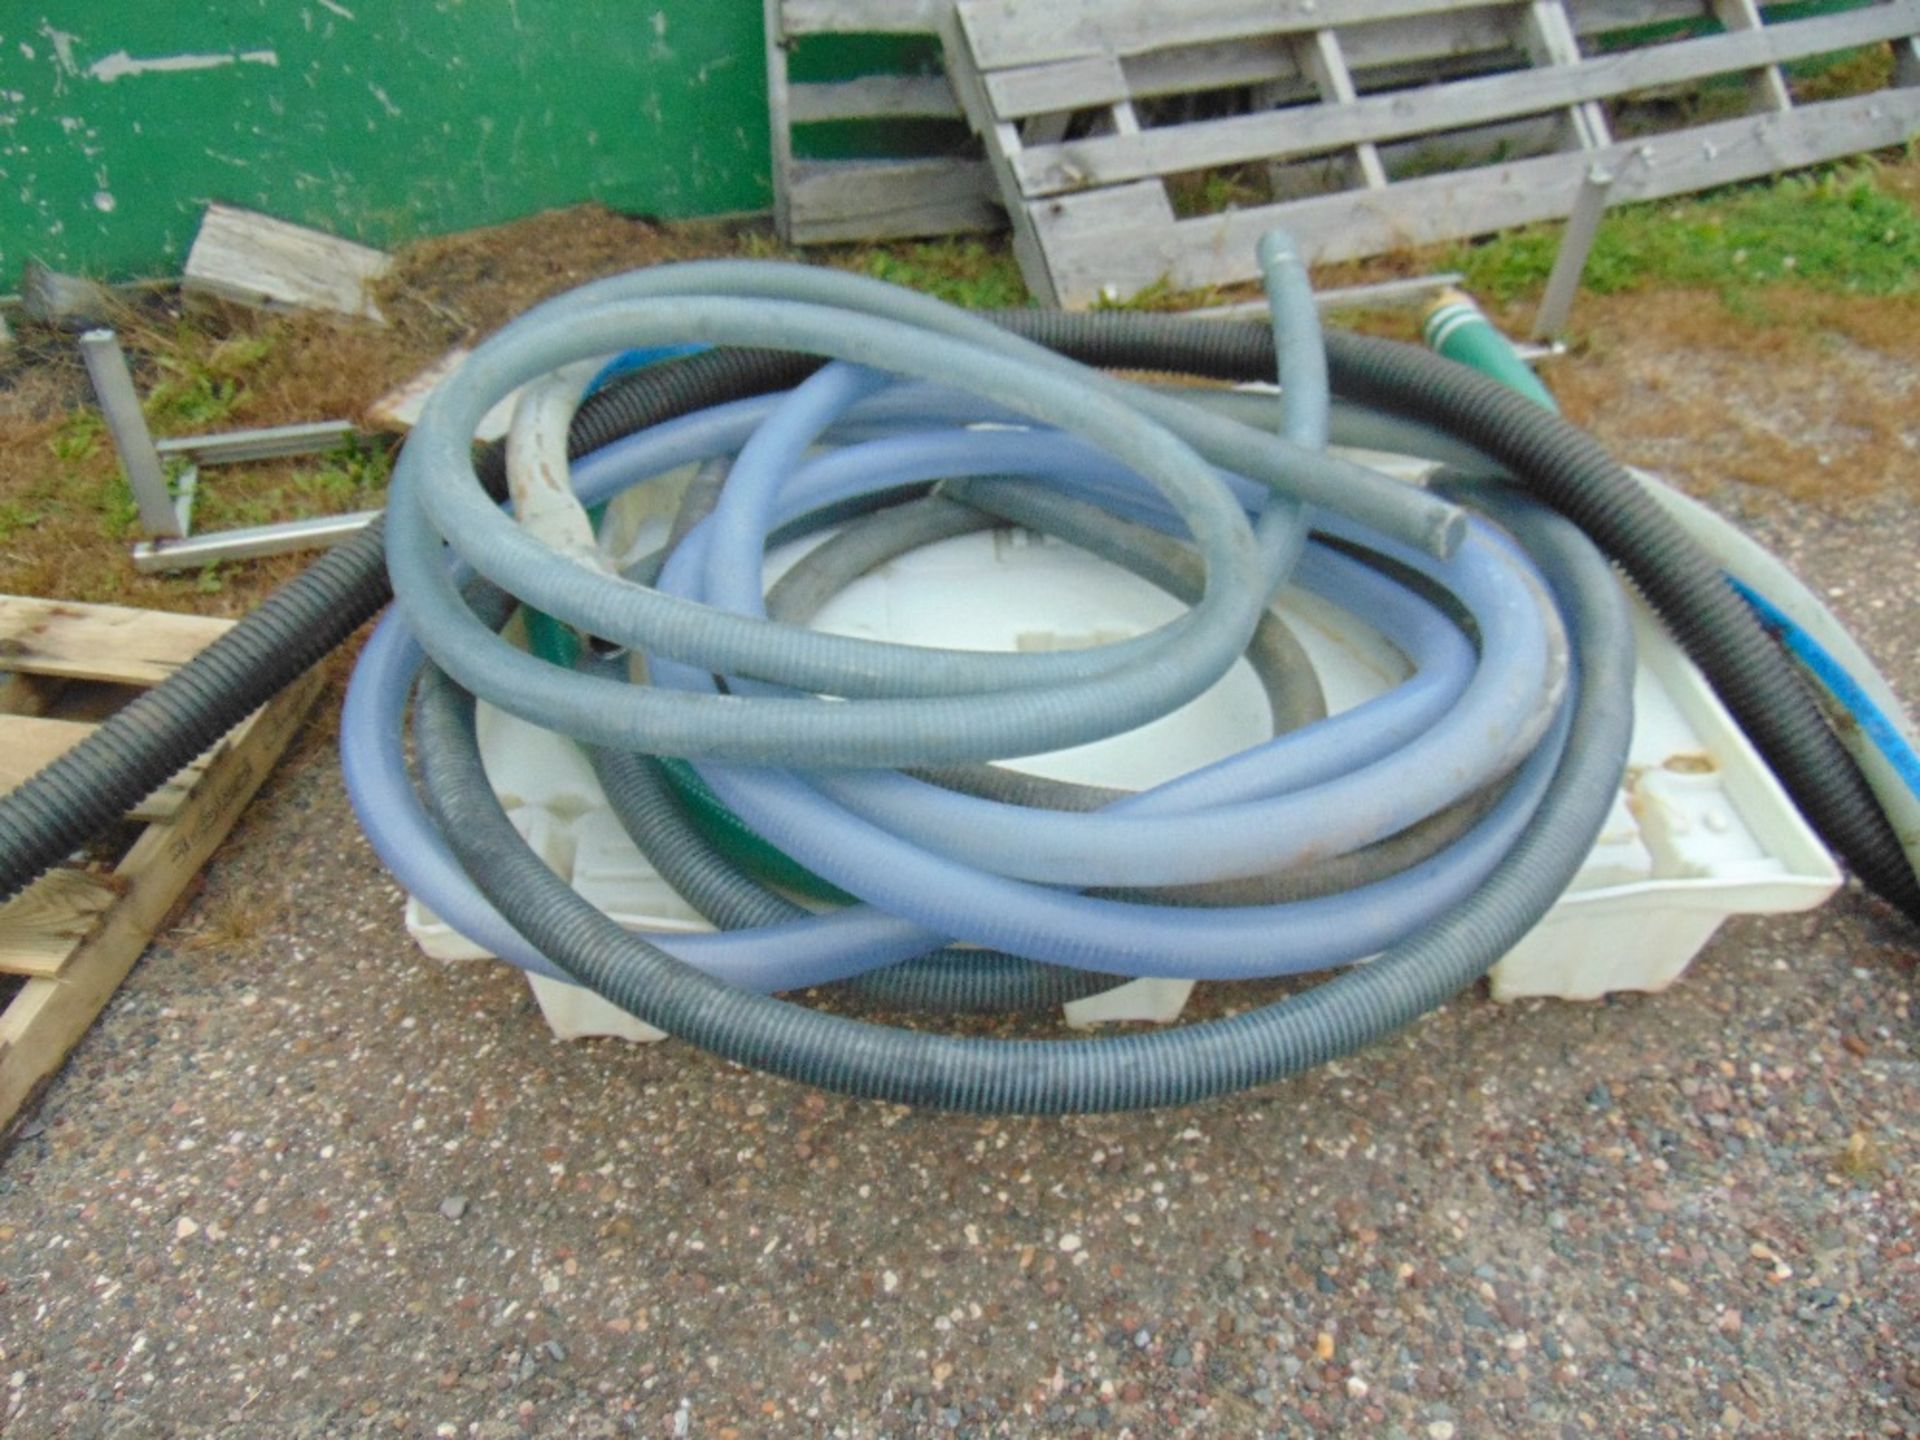 Lot of Assorted Tygon Hoses on Pallet 1 1/2" and 2" sizes (Outside)